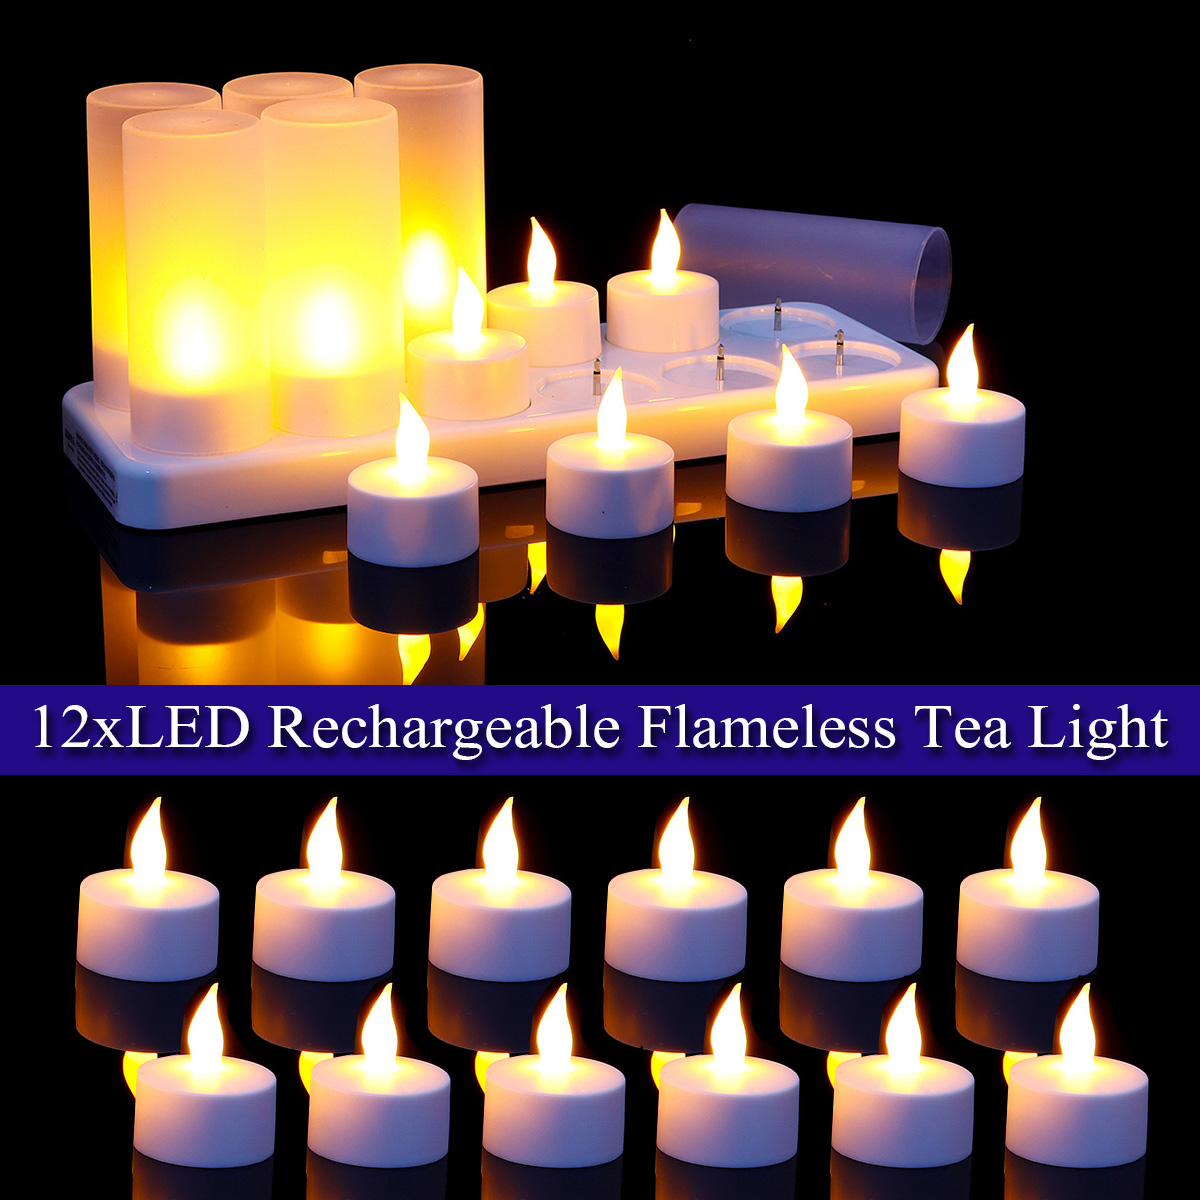 12PCS-Flameless-LED-Candle-Light-Rechargeable-Flickering-Tea-Lamp-for-Birthday-Party-US-Plug-AC110V-1675885-1